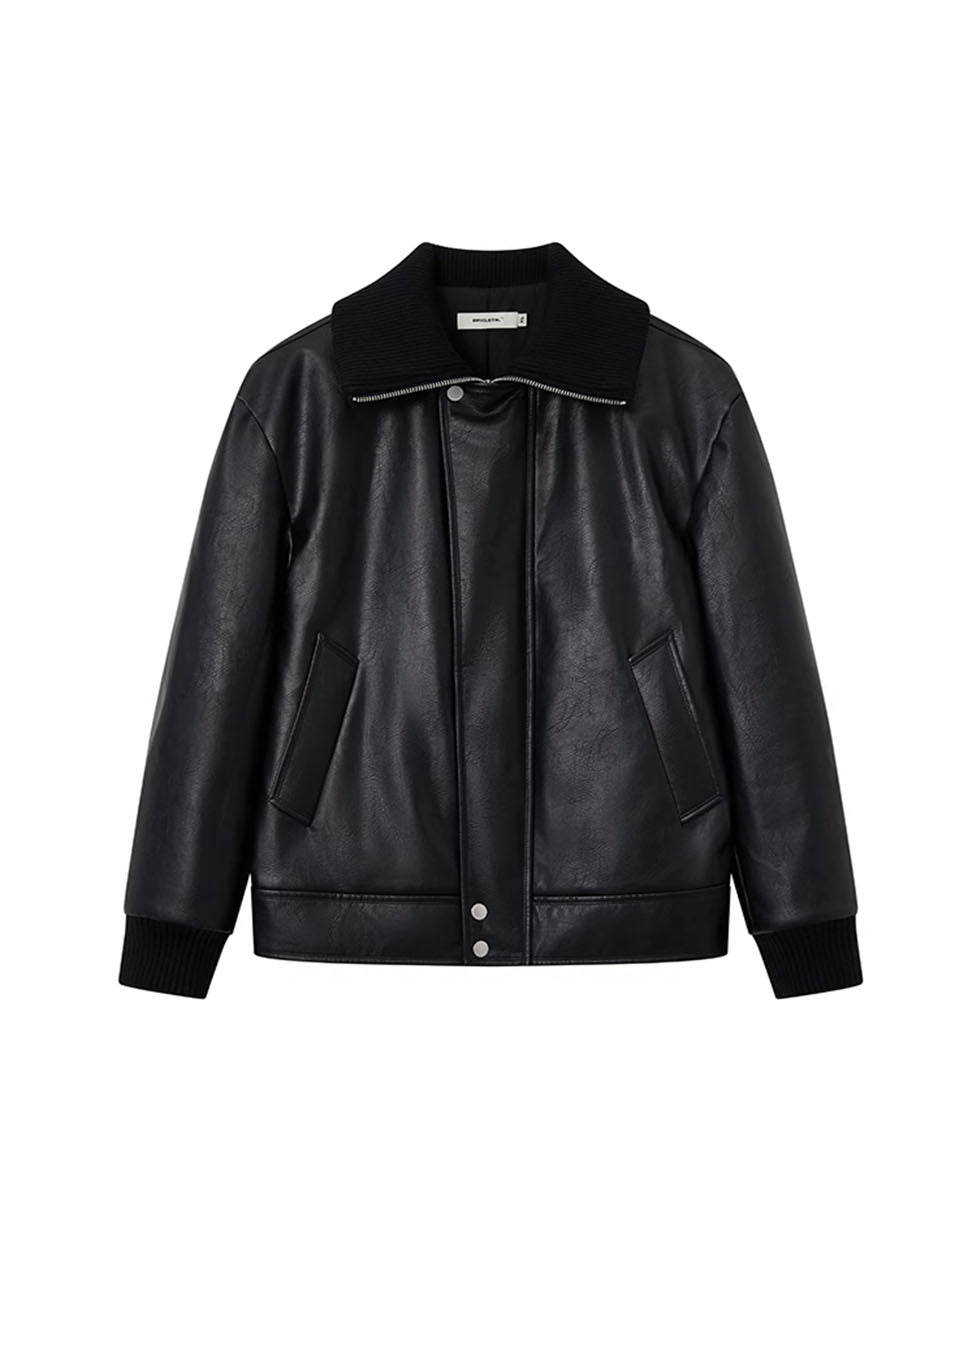 T-shape ribbed high collar casual leather jacket